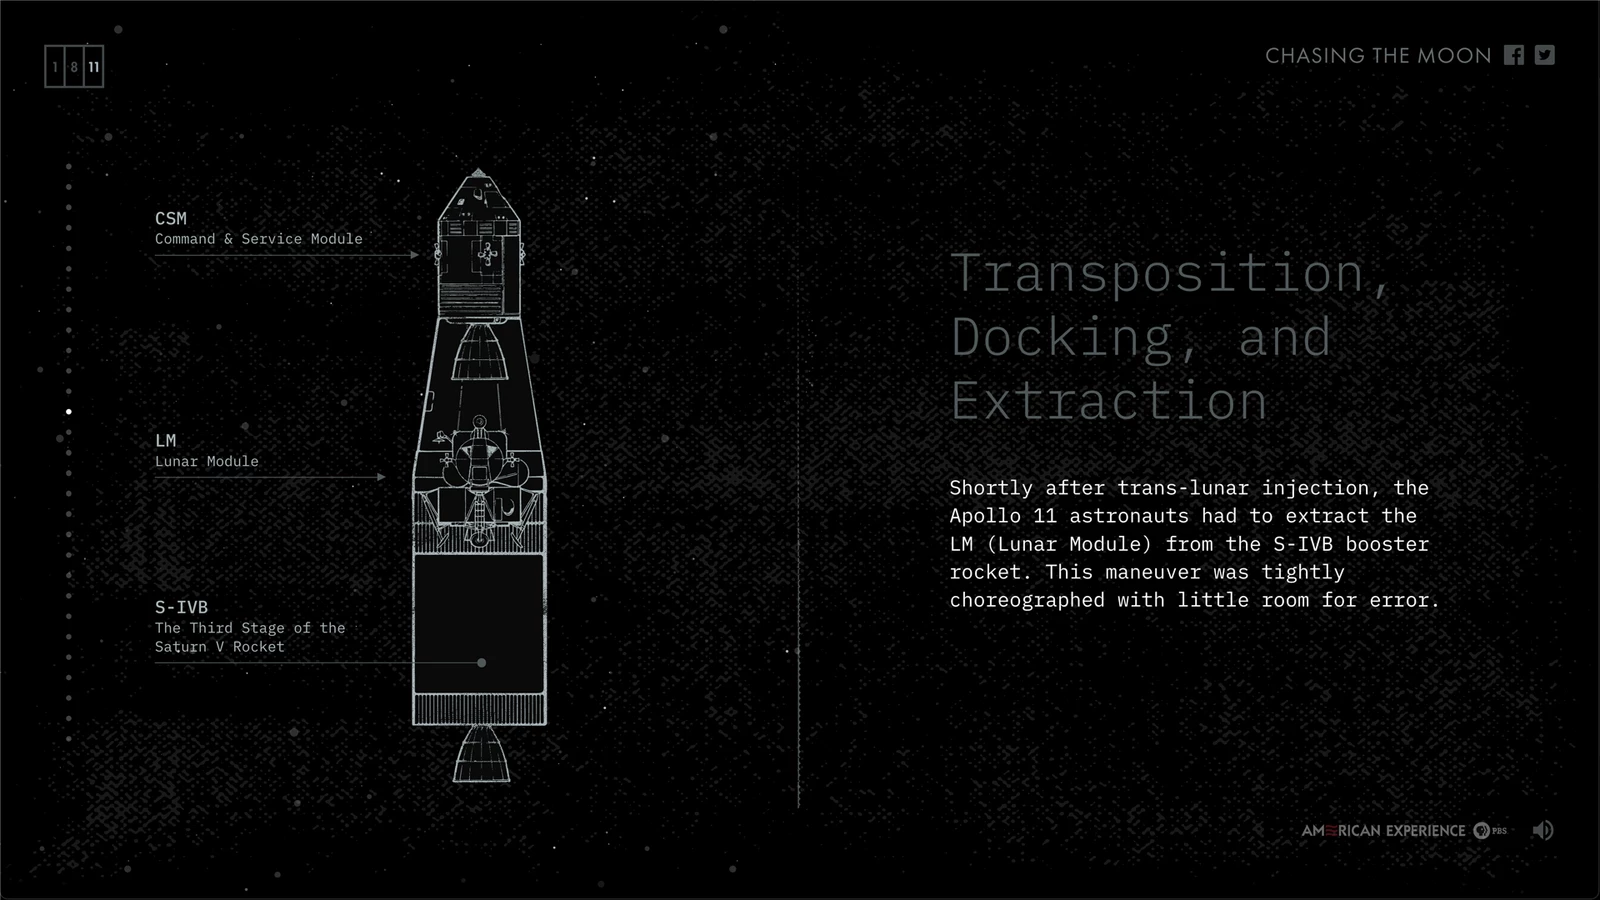 Animation of Transposition, Docking, and Extraction Procedure